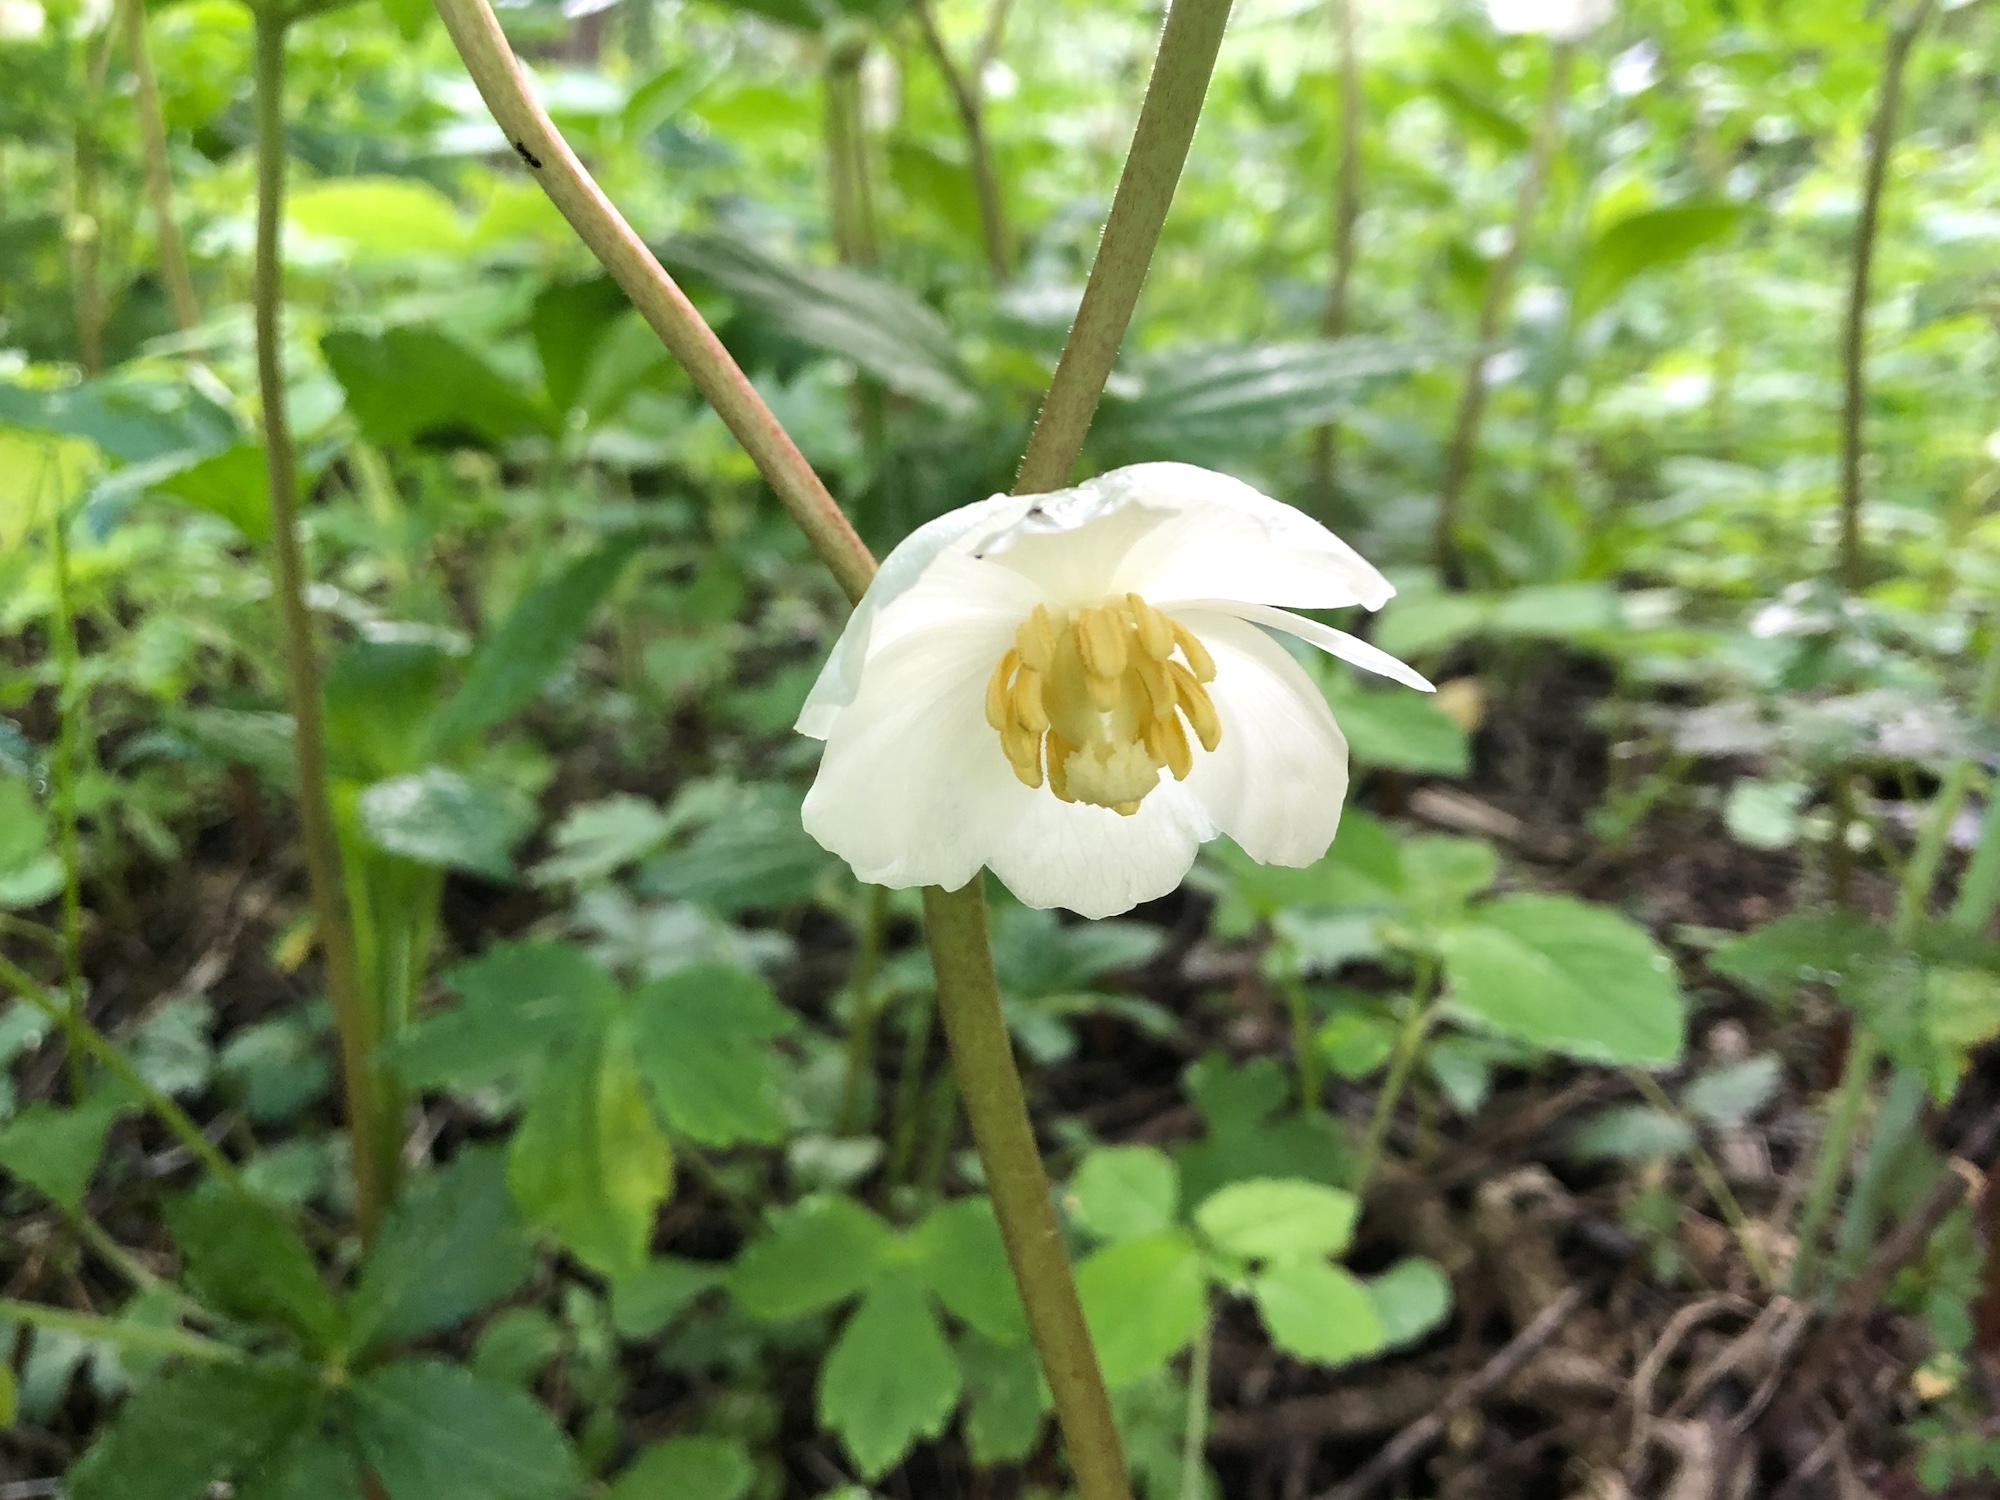 Mayapple blooms in wood between Duck Pond and Marion Dunn in Madison, Wisconsin on May 25, 2020.